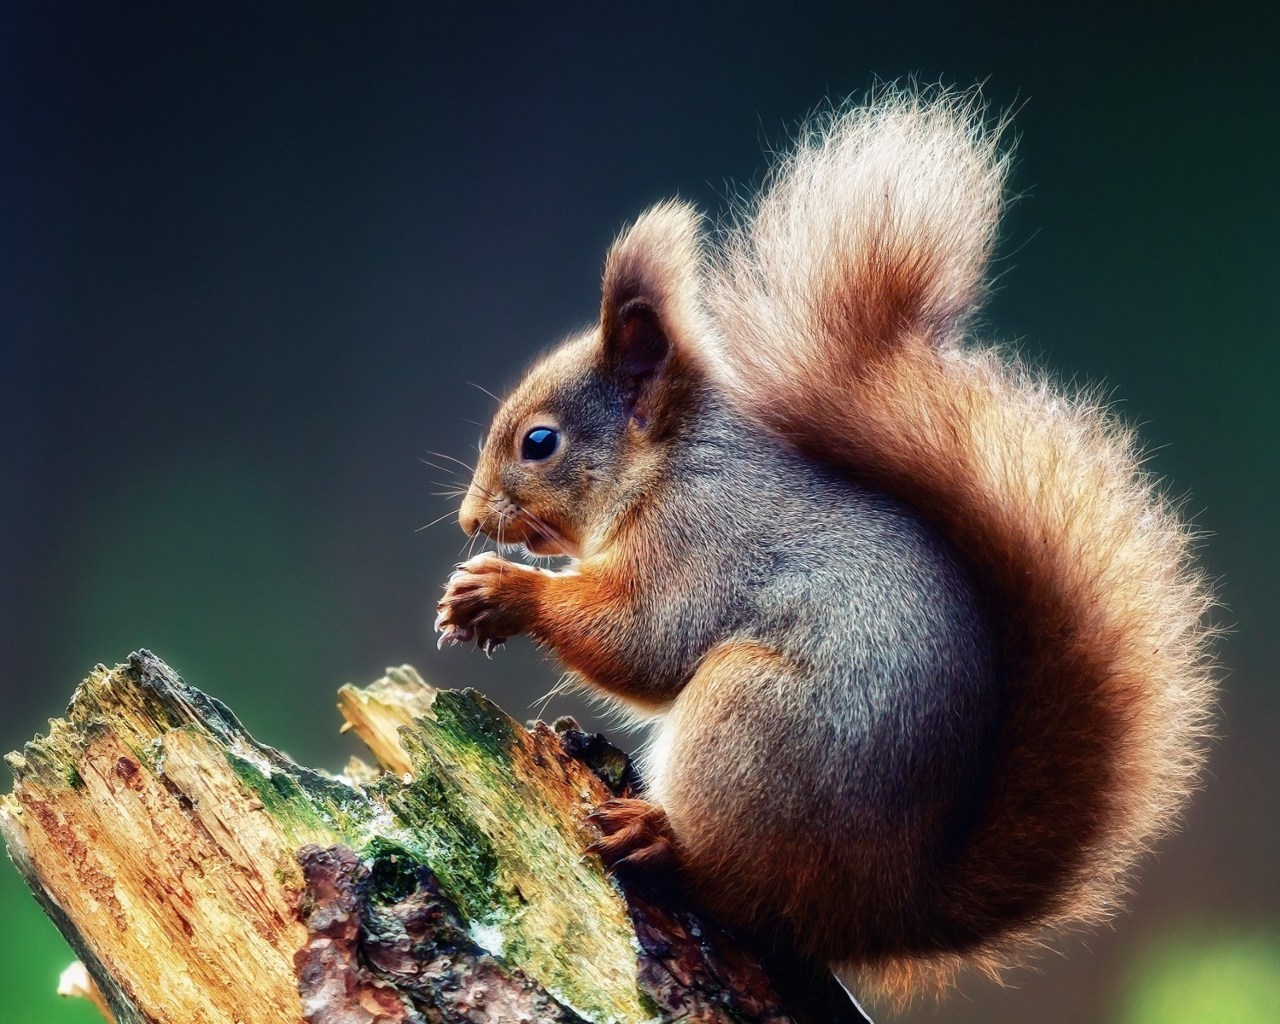 Squirrel Eating A Nut wallpaper 1280x1024